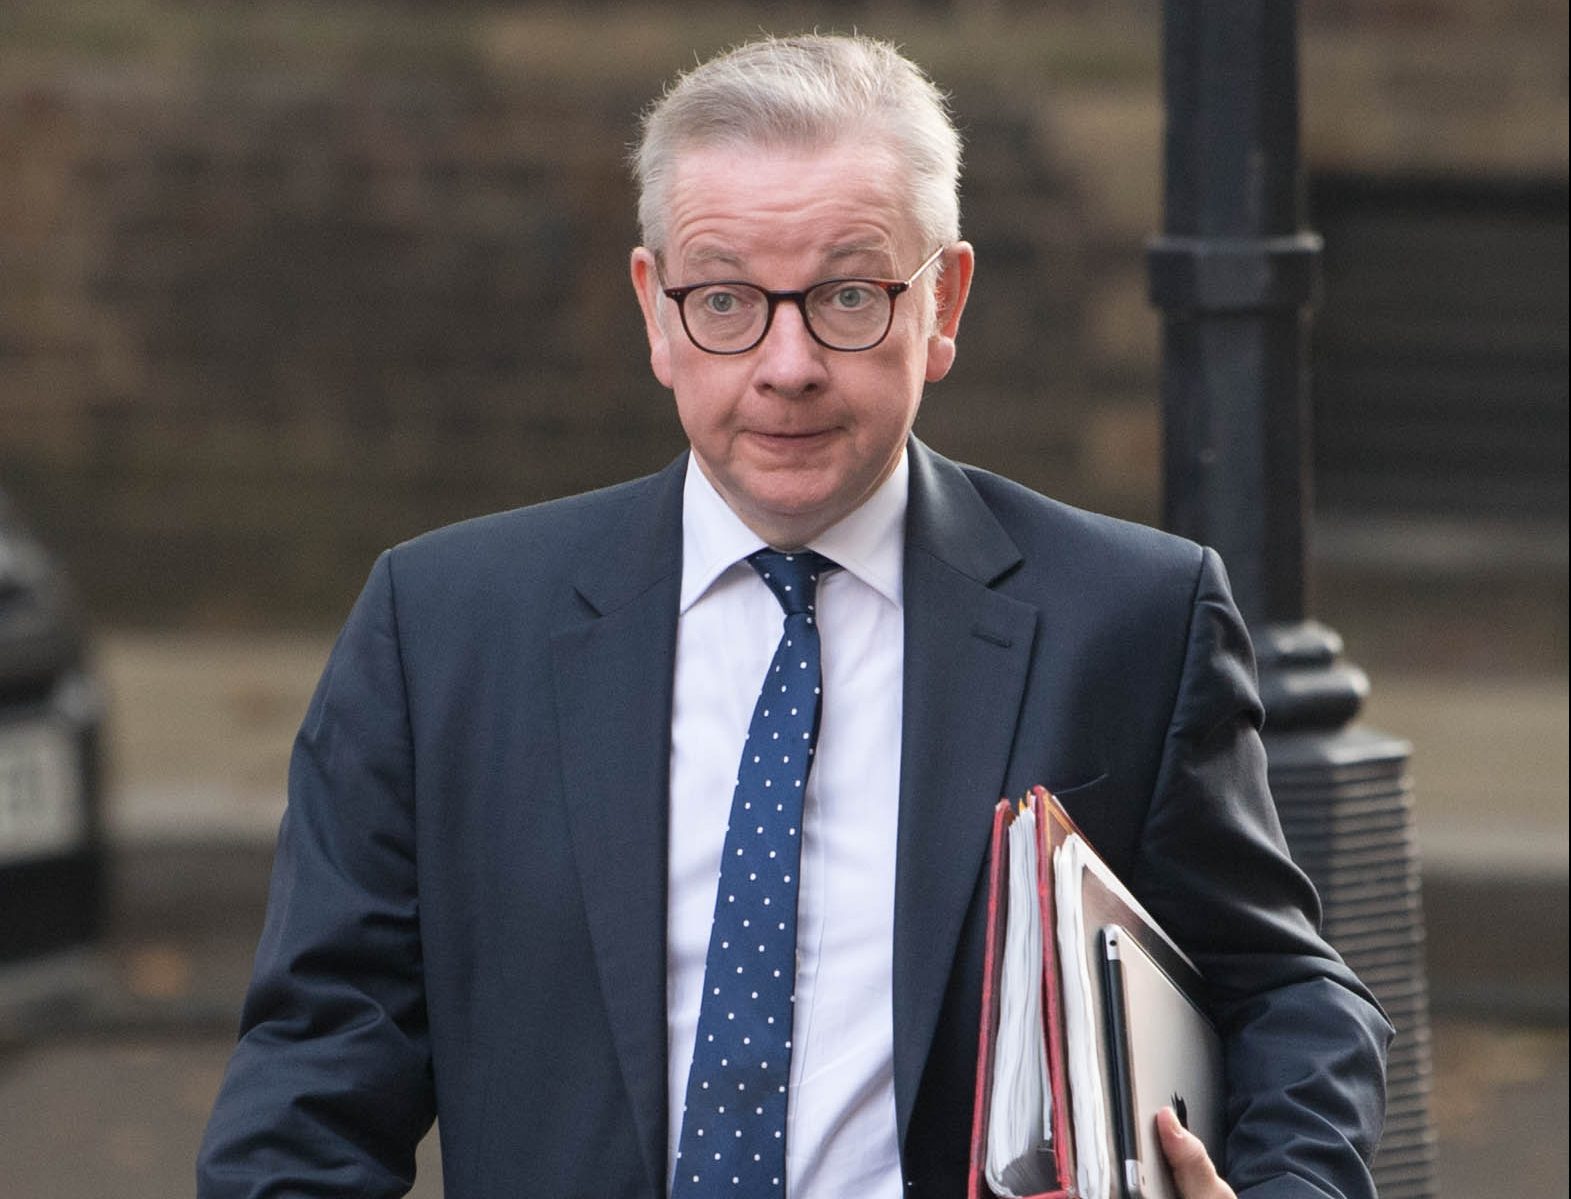 WATCH: Gove defends £7k day rates for Test and Trace consultants